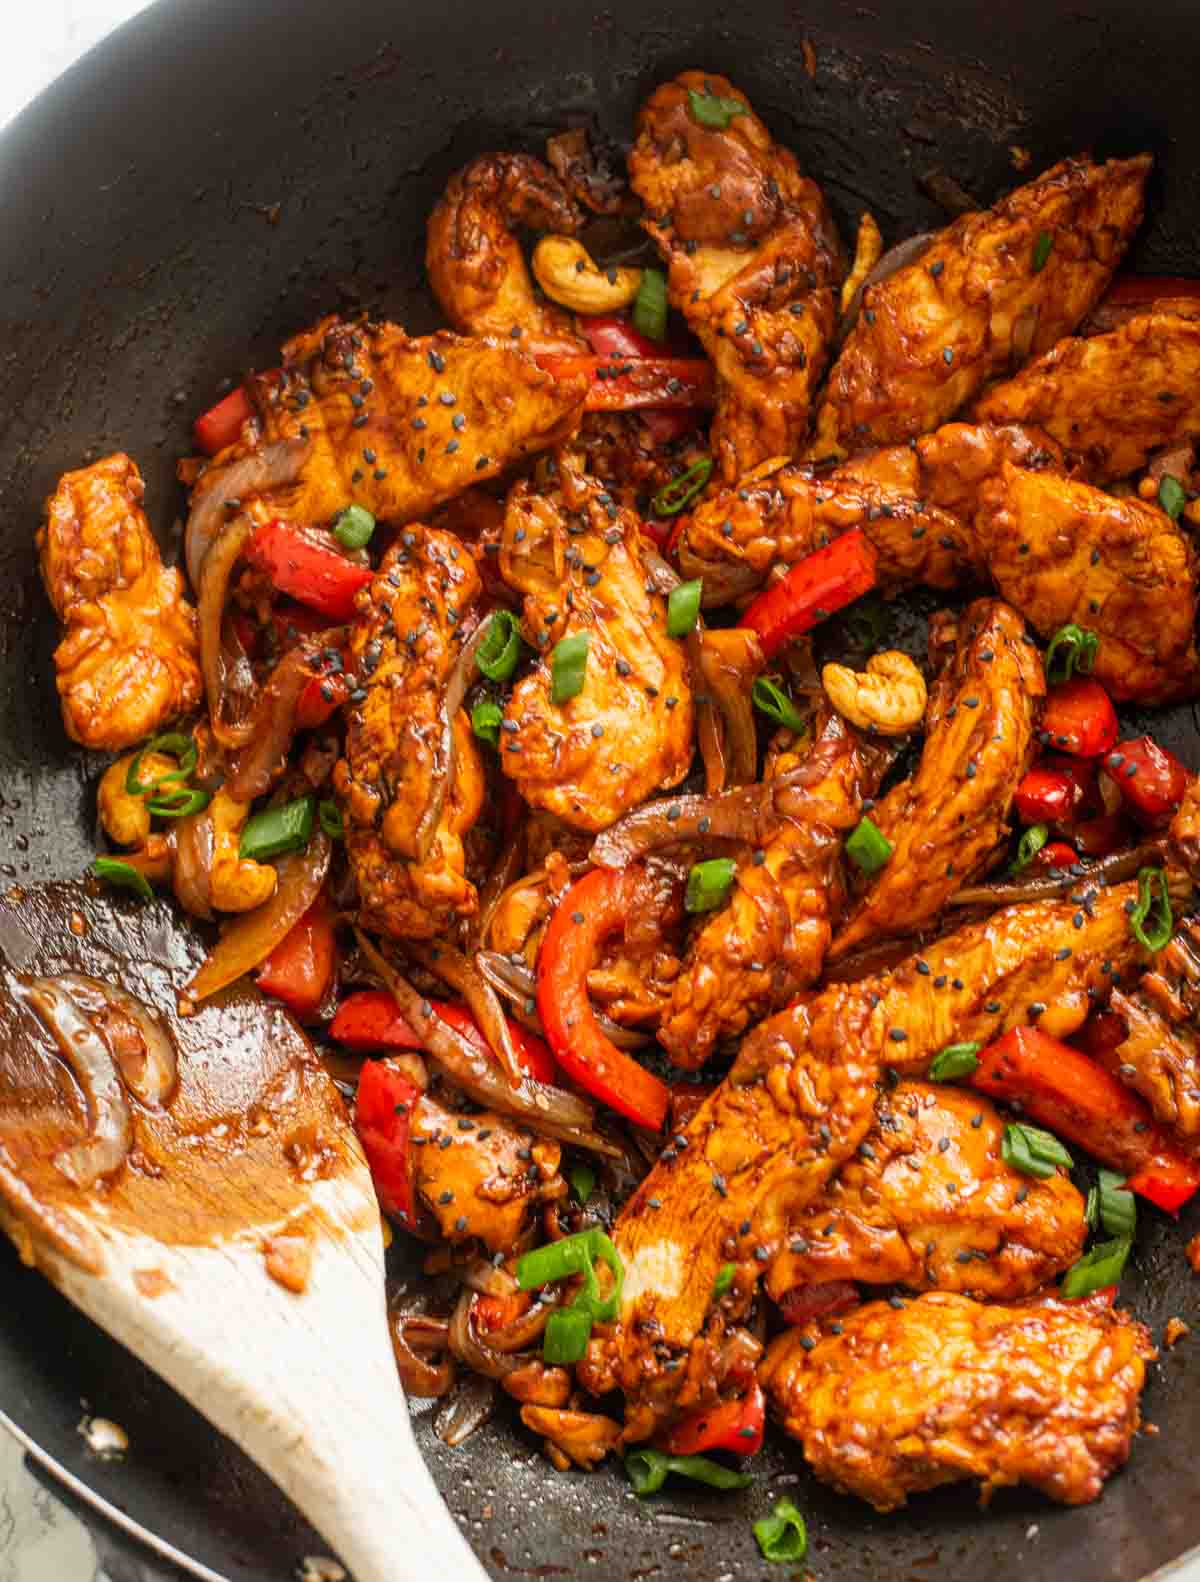 Chicken with bell peppers and scallions in a wok with wooden spatula